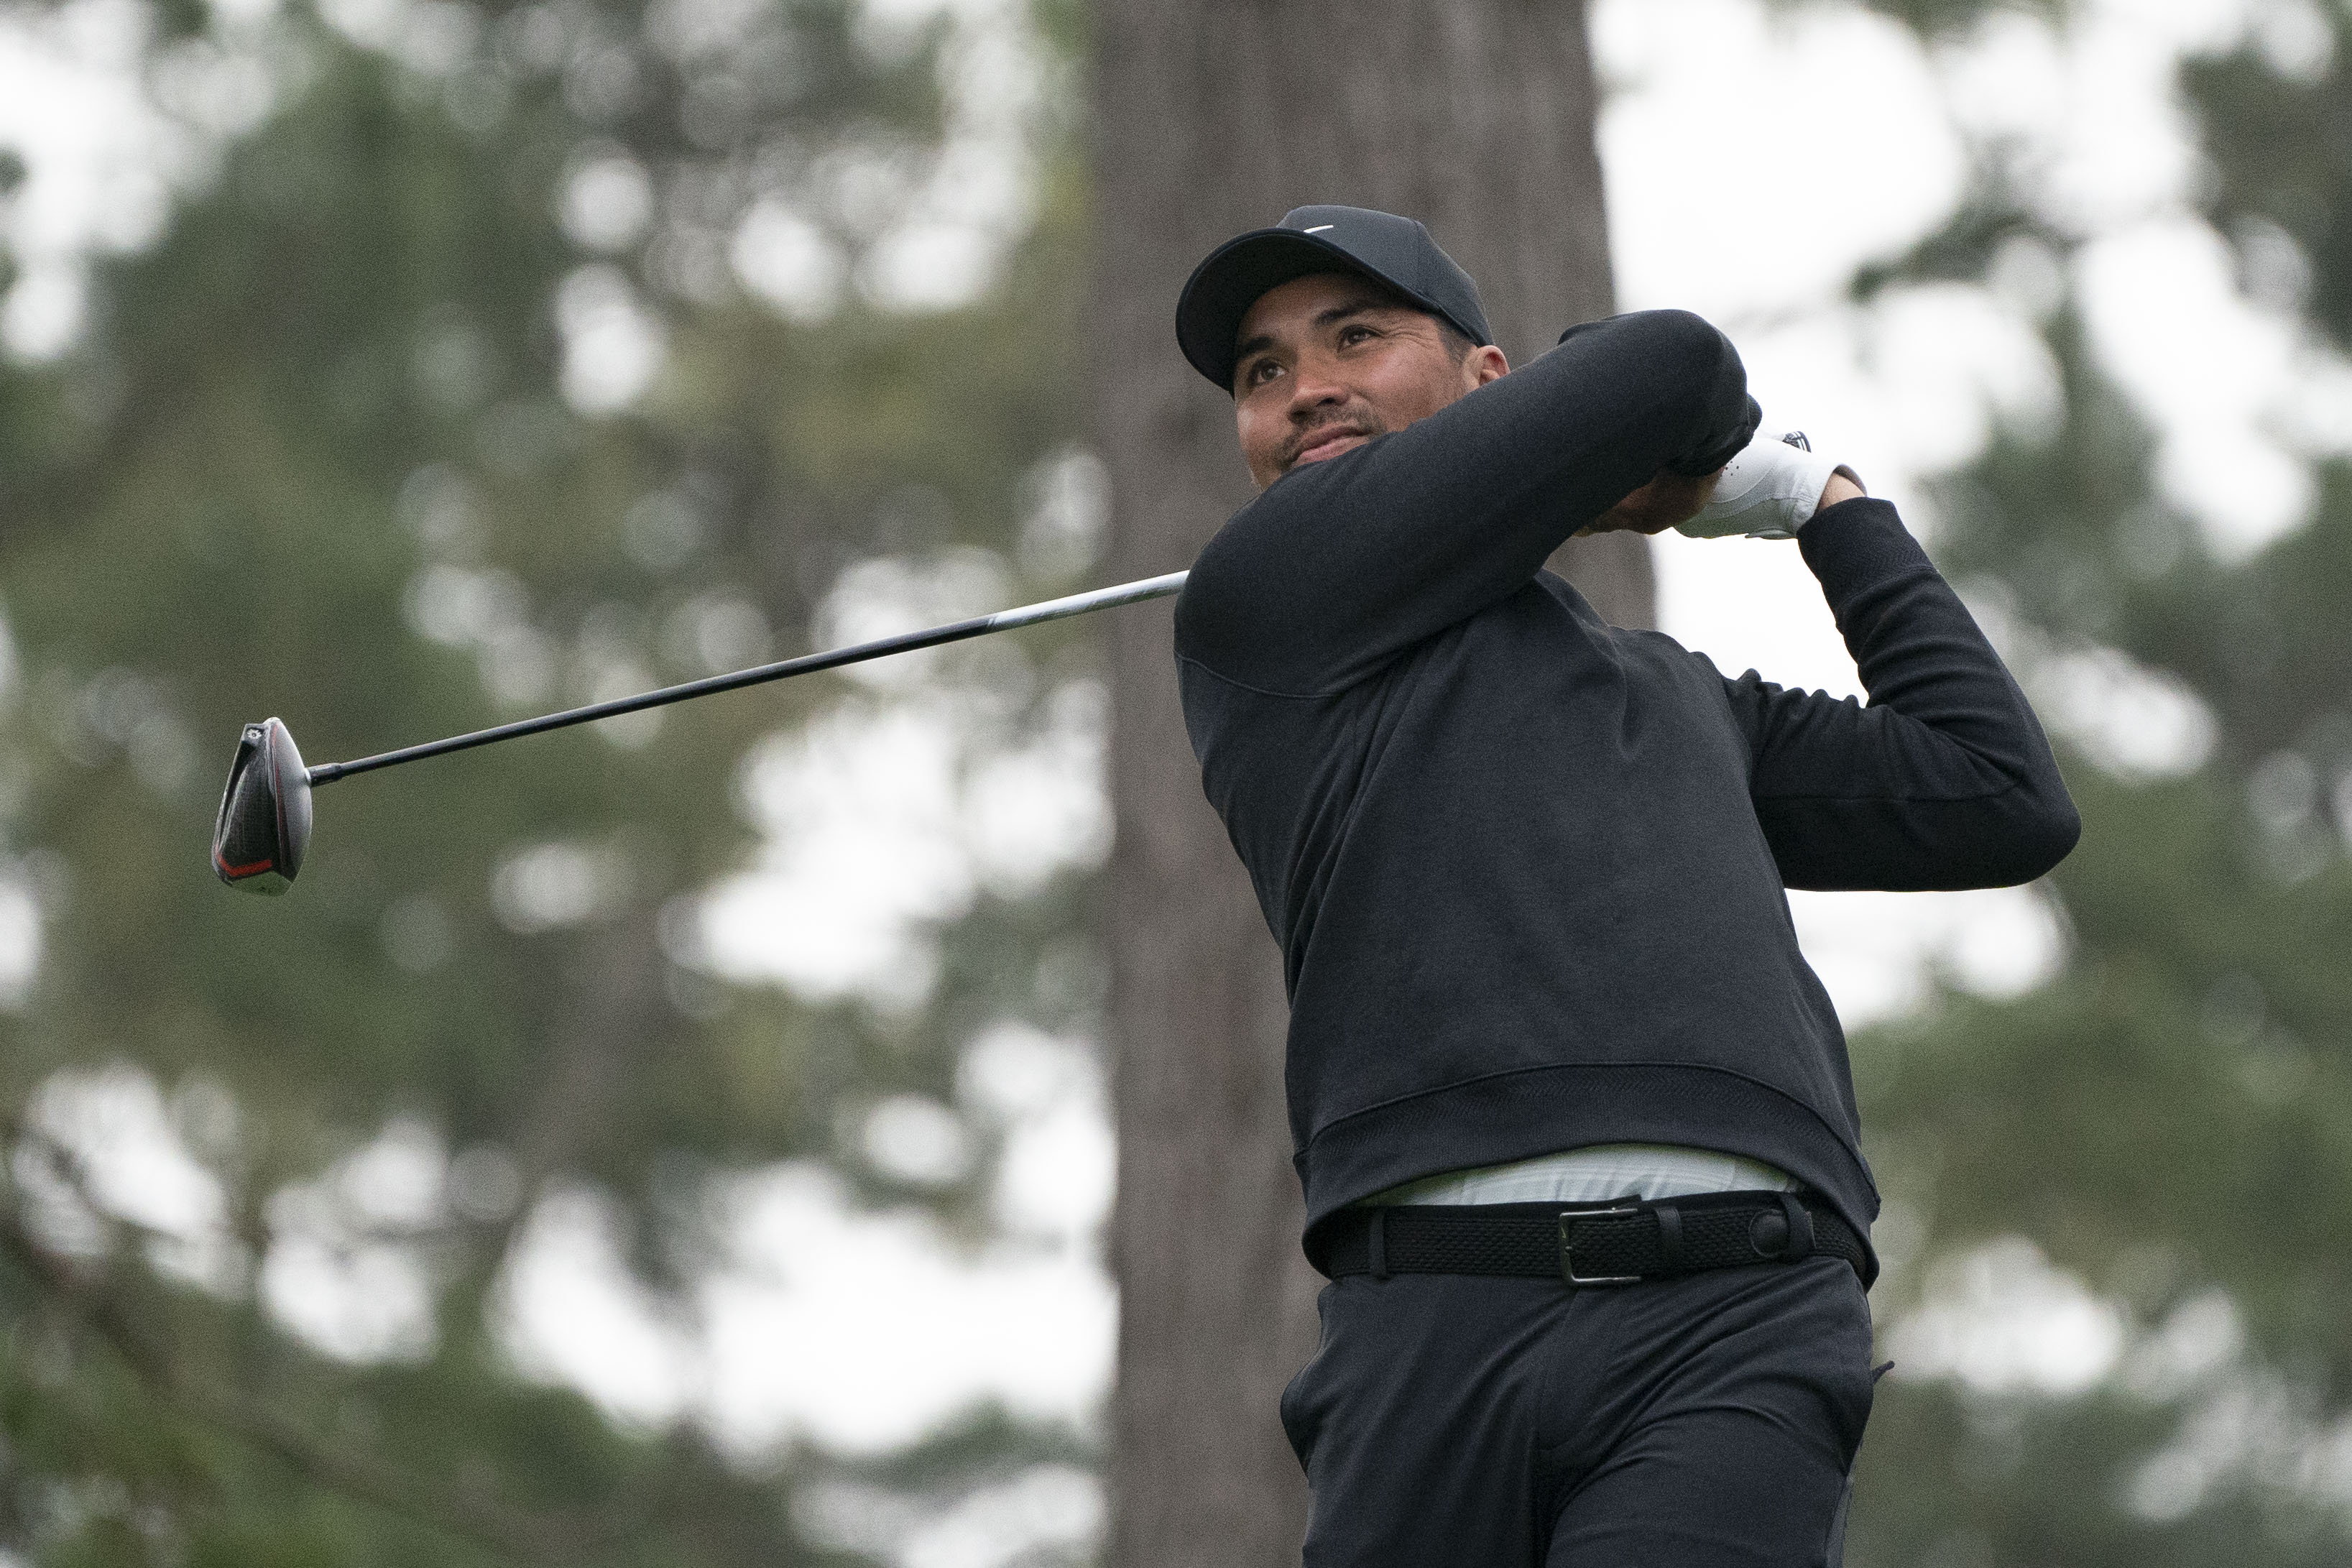 Jason Day reveals his golf career was nearly done last year